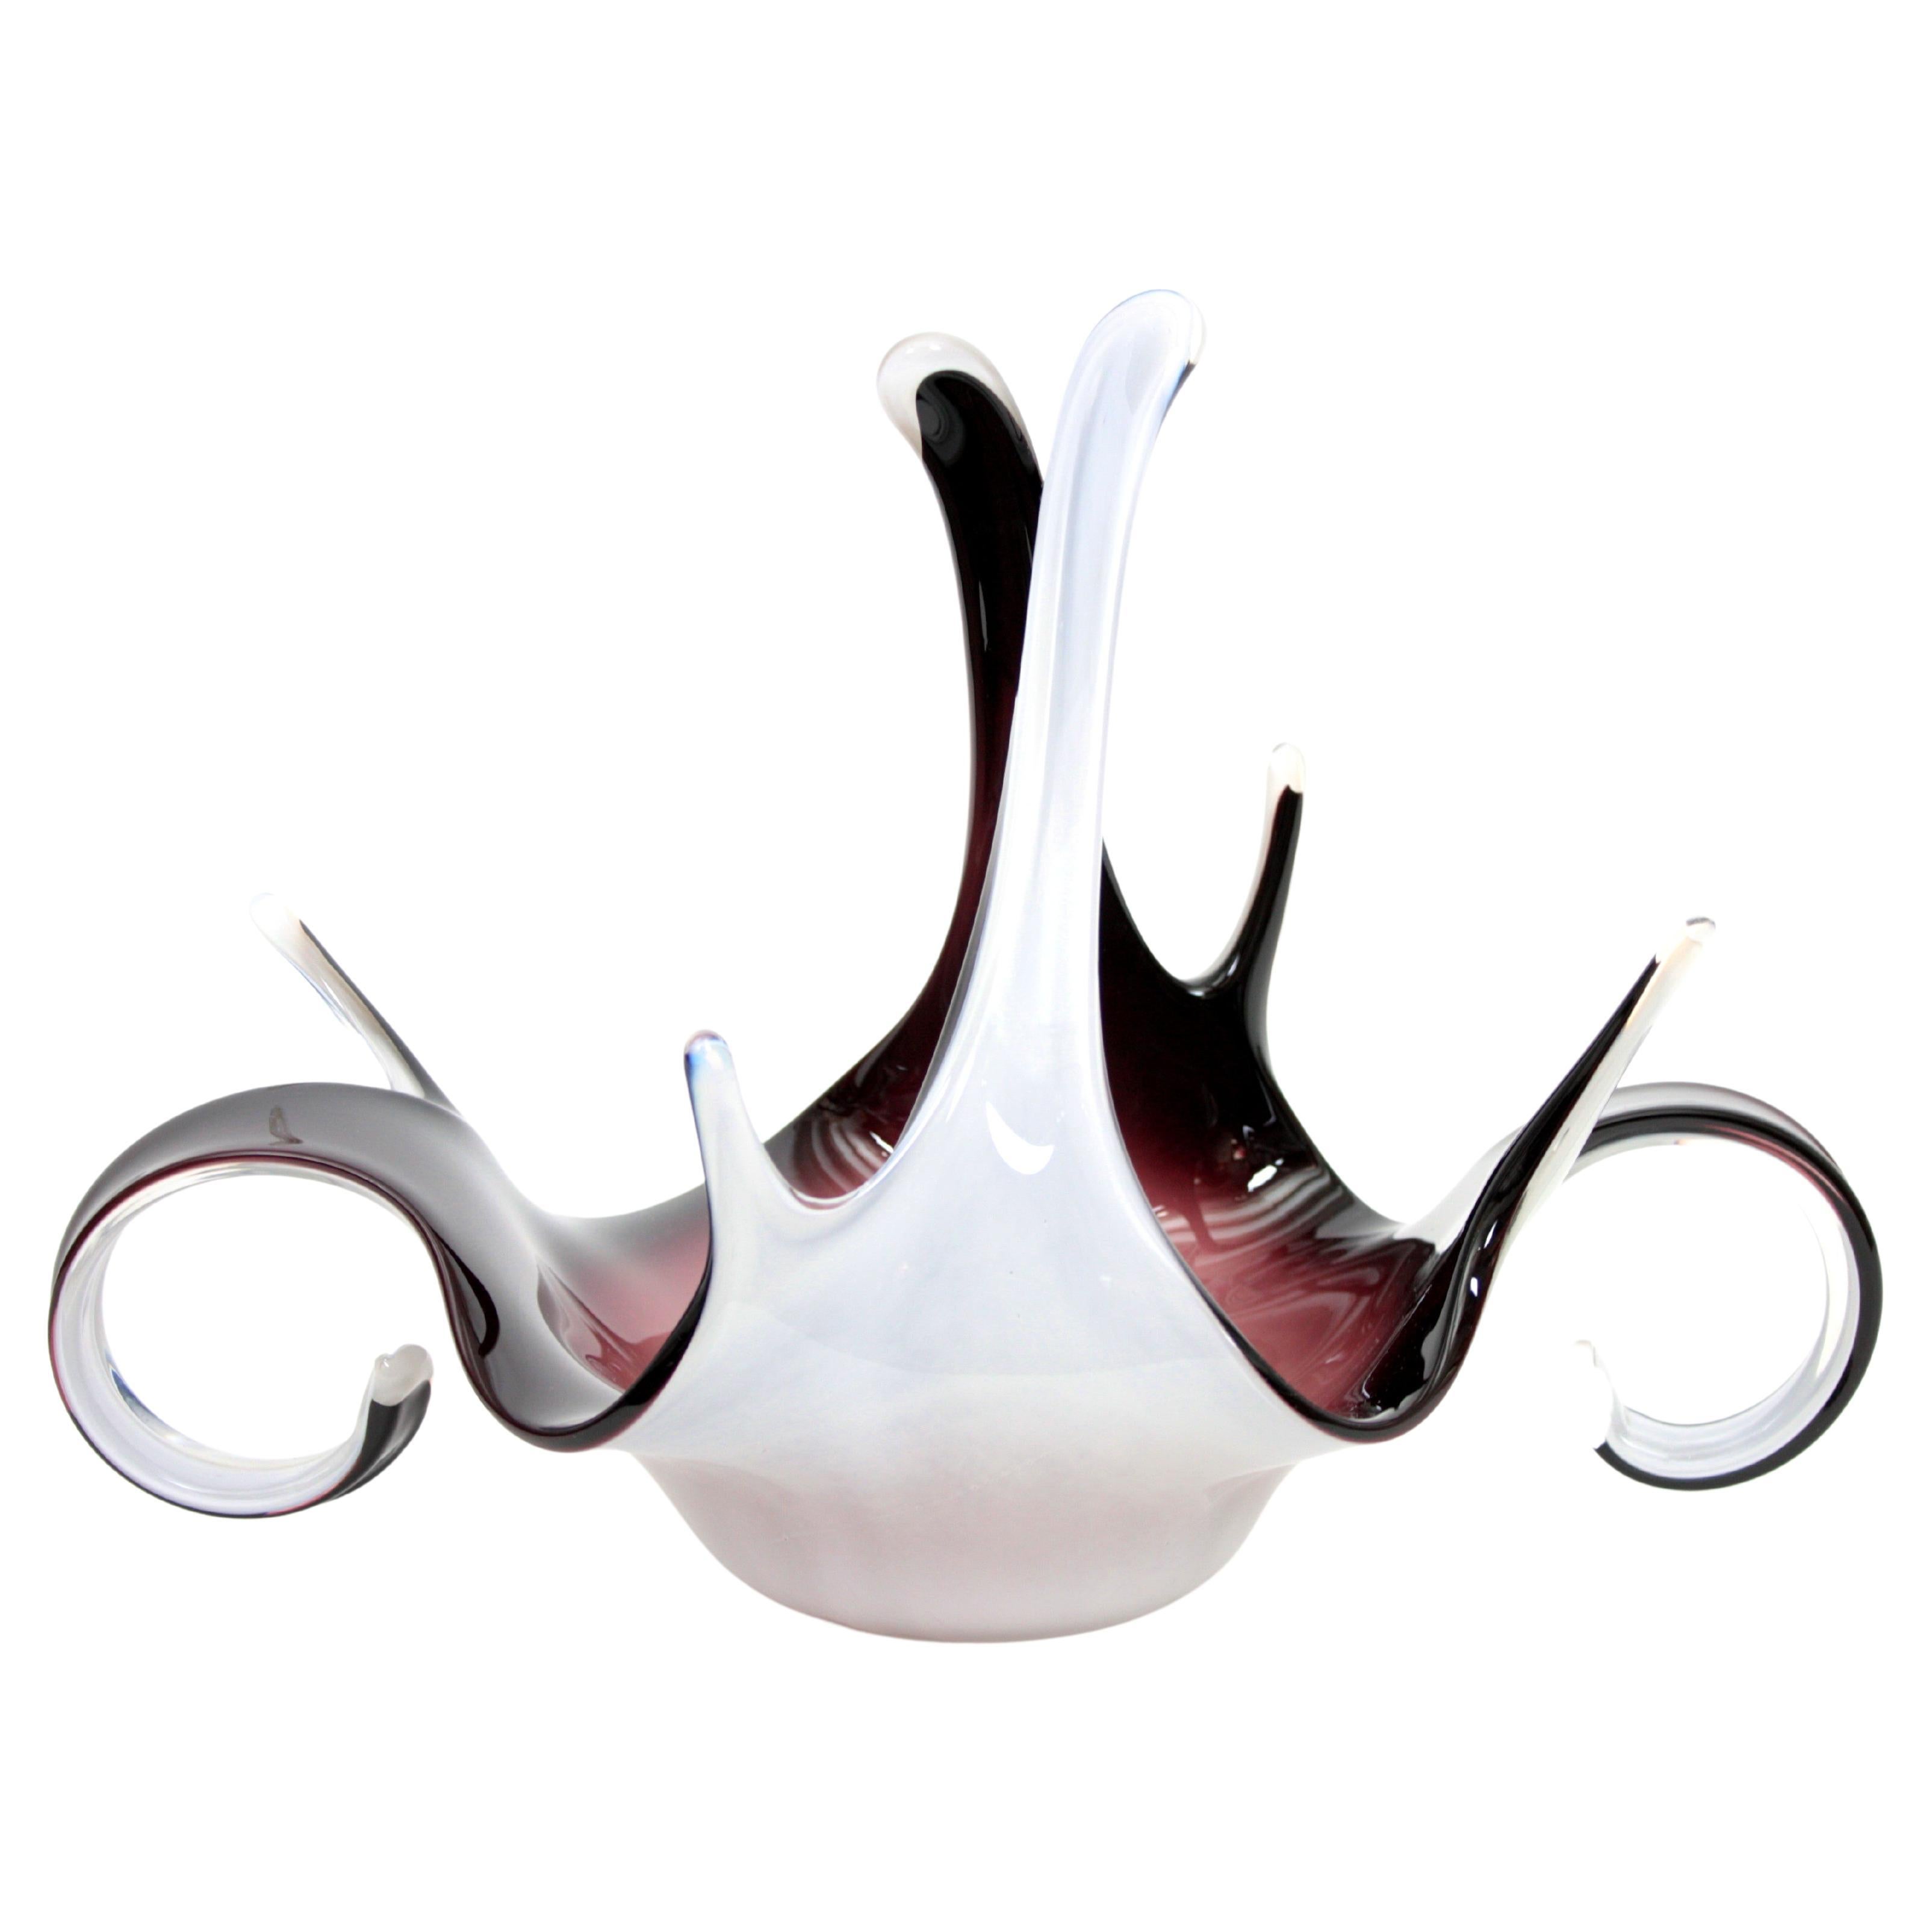 Italian Mid-Century Modern purple and white murano glass free form centerpiece. Italy, 1960s
A highly decorative and sculptural Murano glass centerpiece made in shades of garnet and pink at the interior part and white glass at the exterior